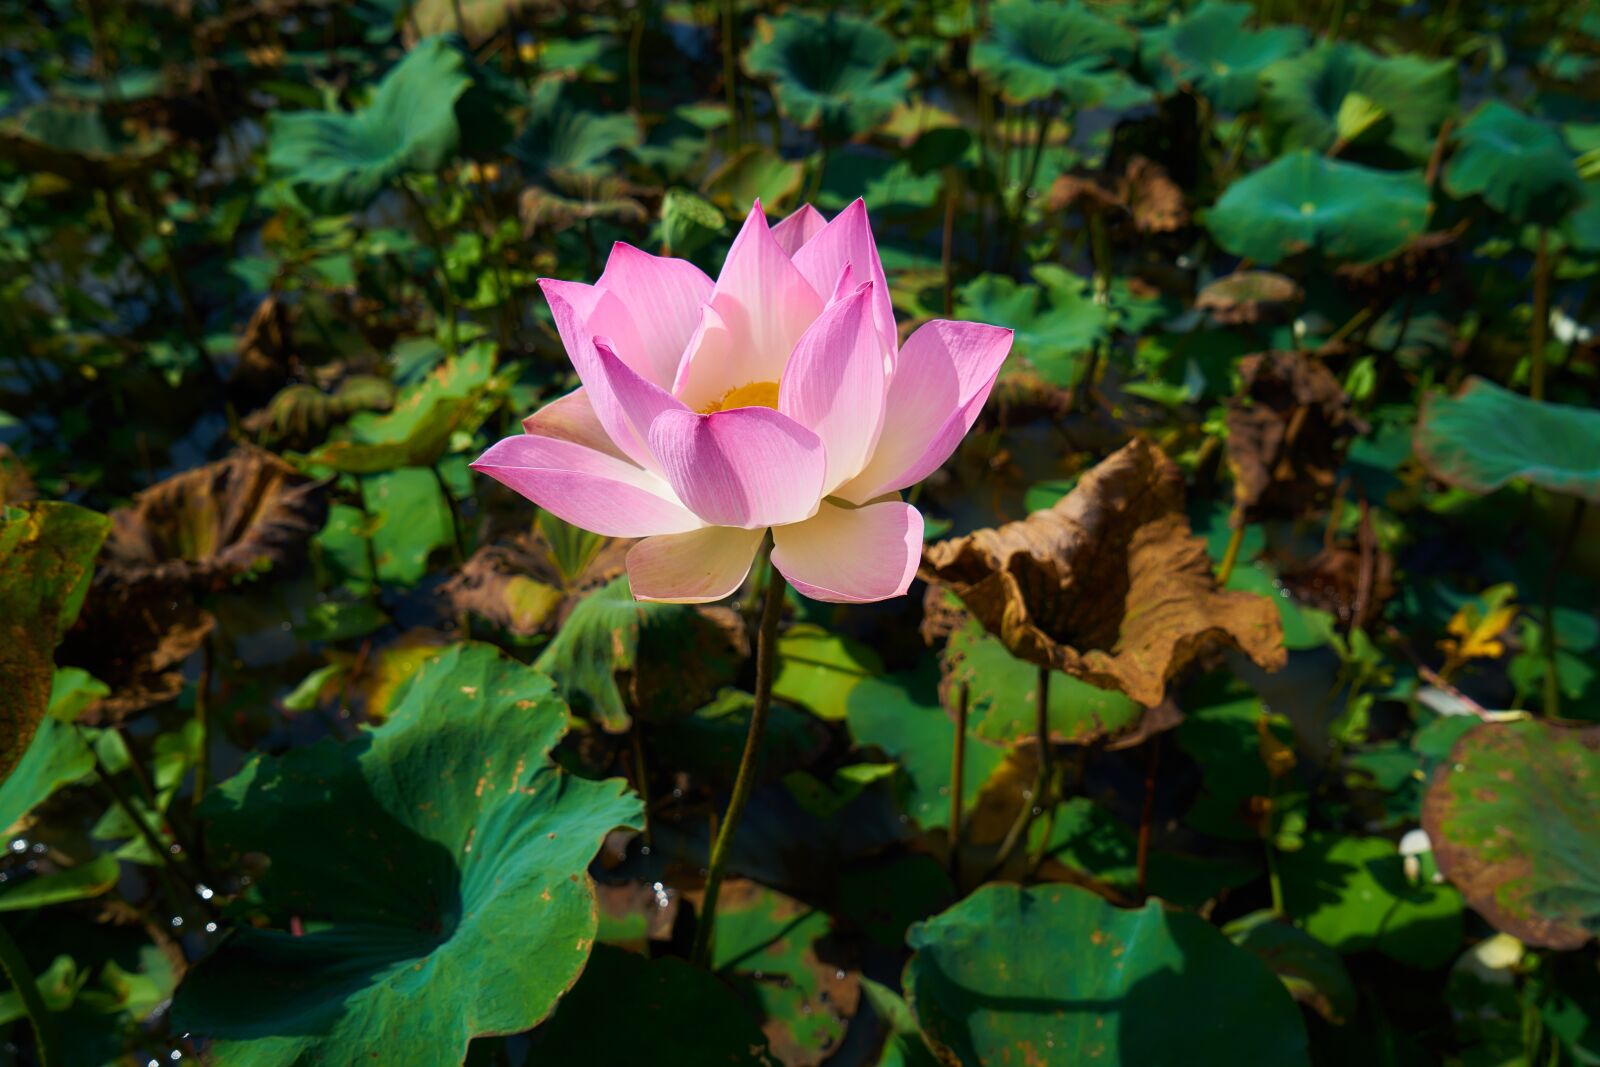 Sony a7R II sample photo. Flower, lotus, nature photography